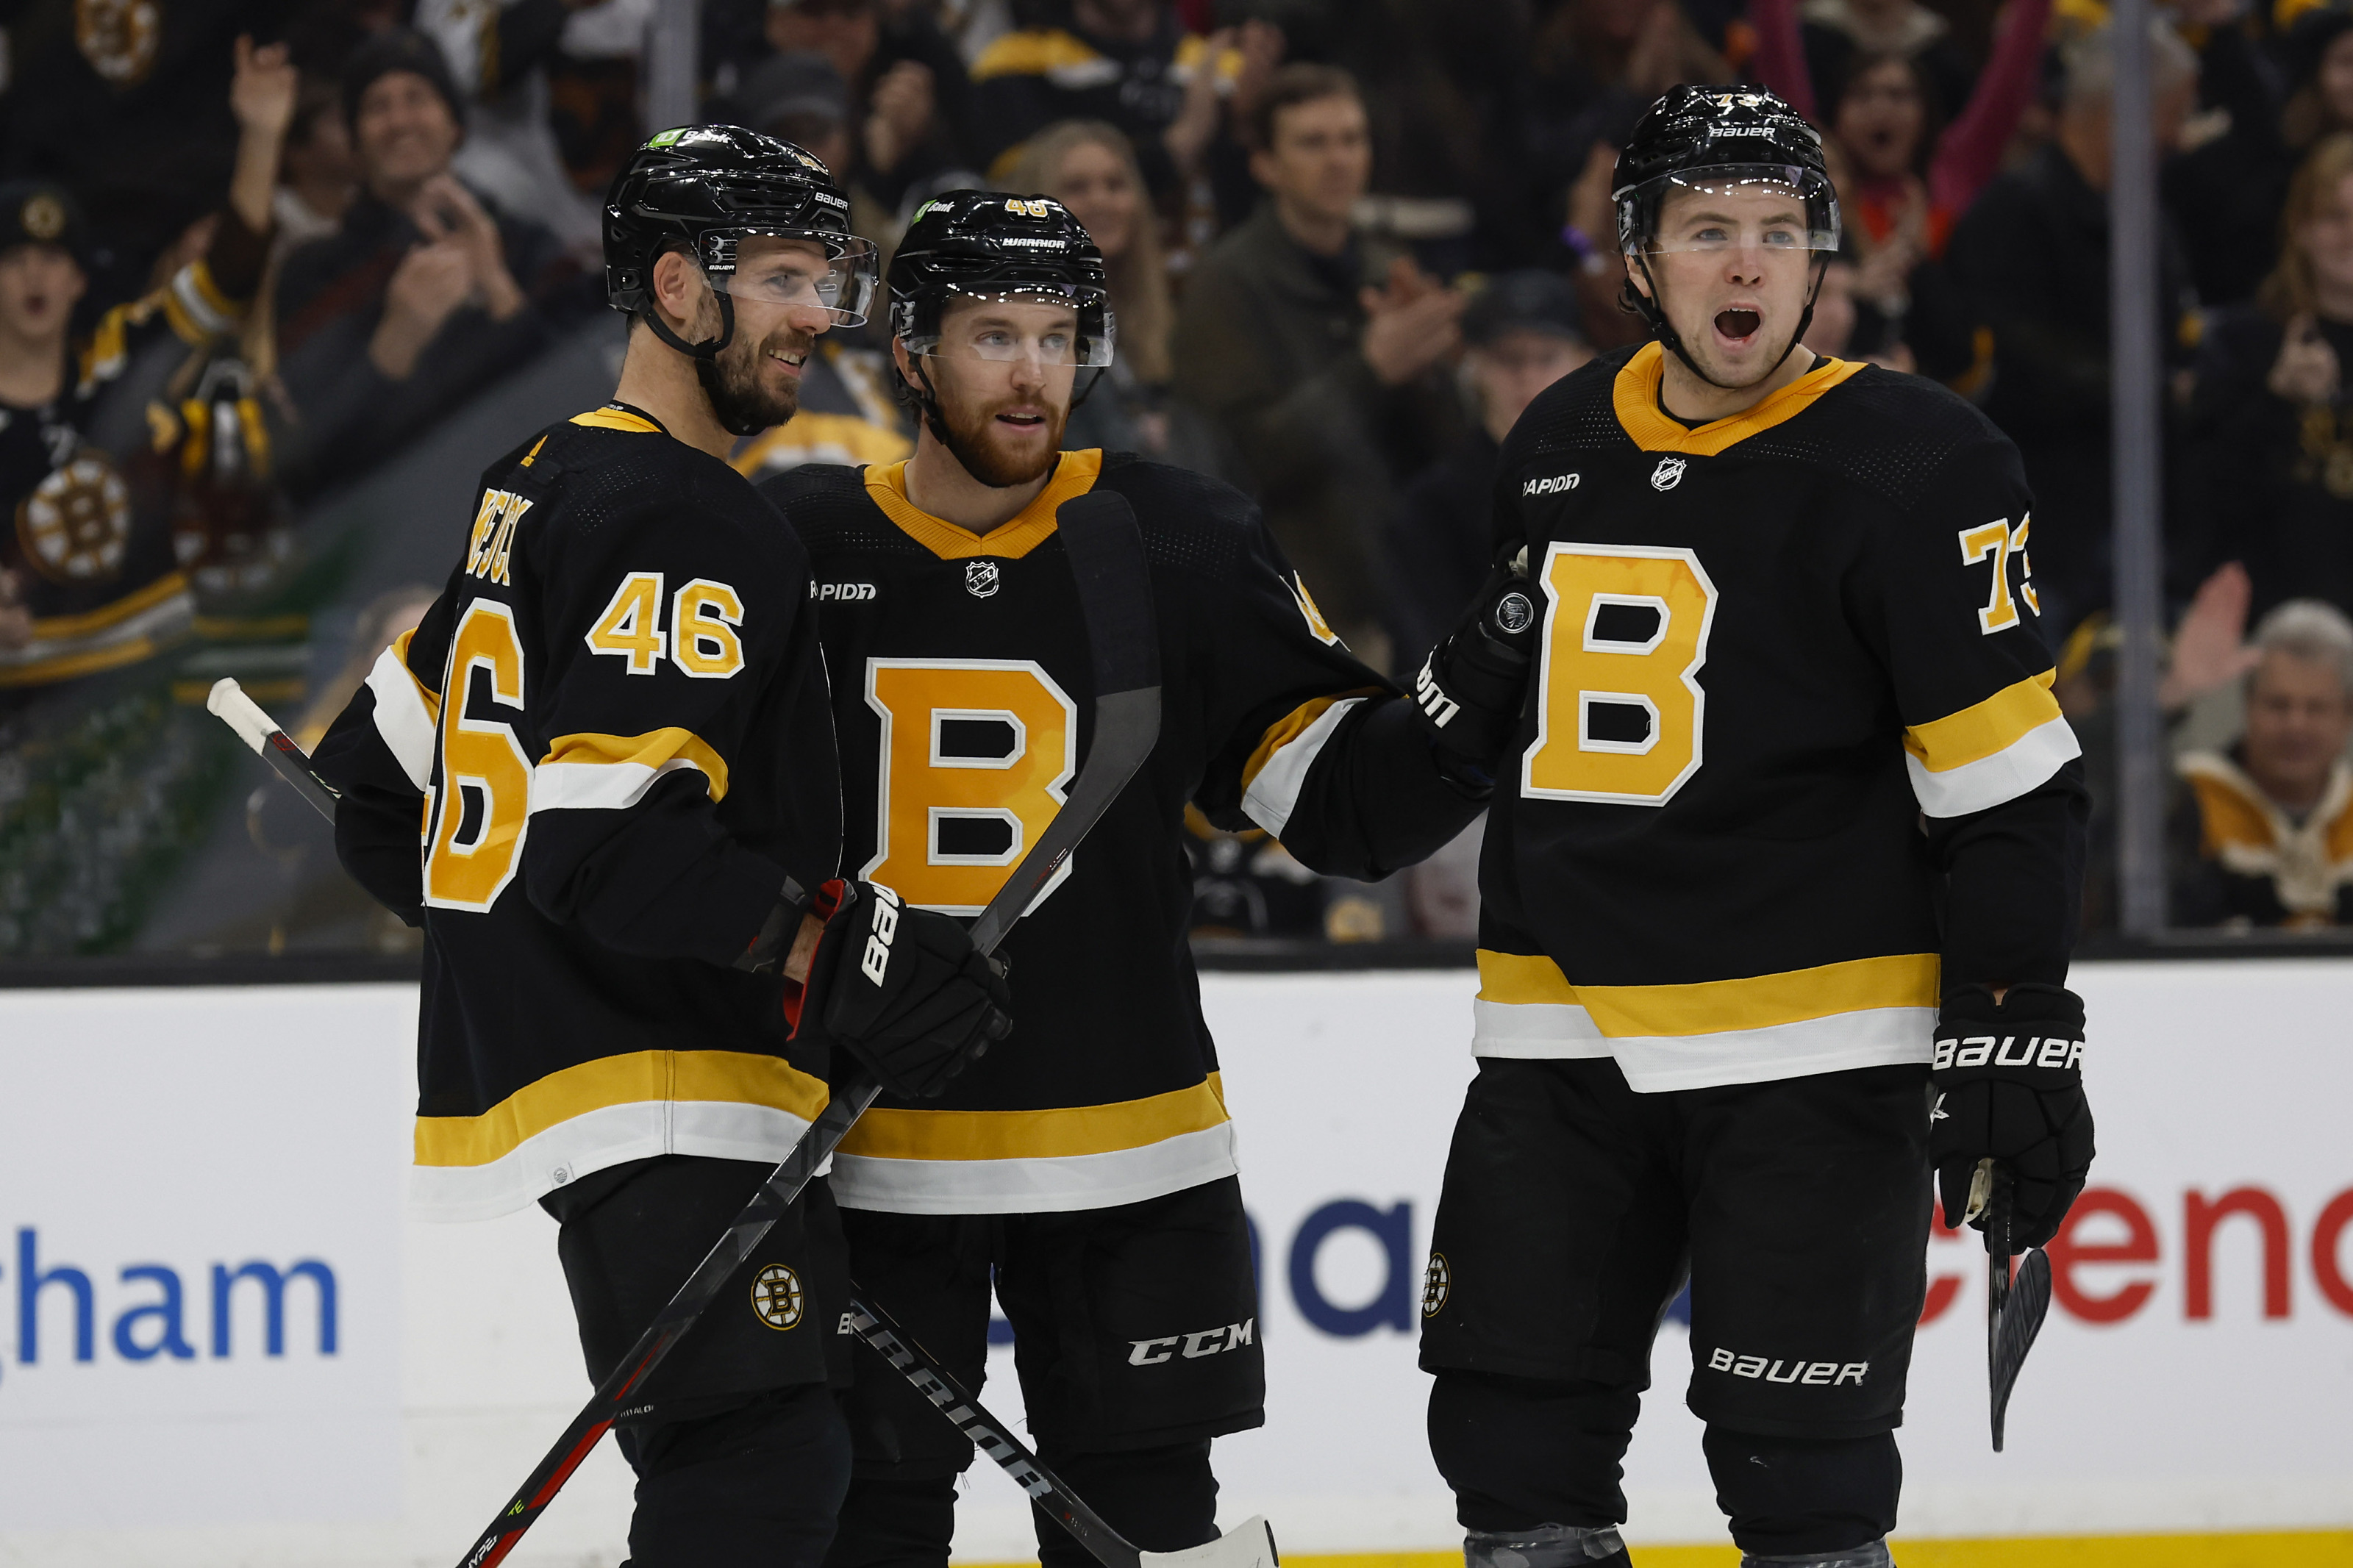 Projecting the Bruins' opening night lineup